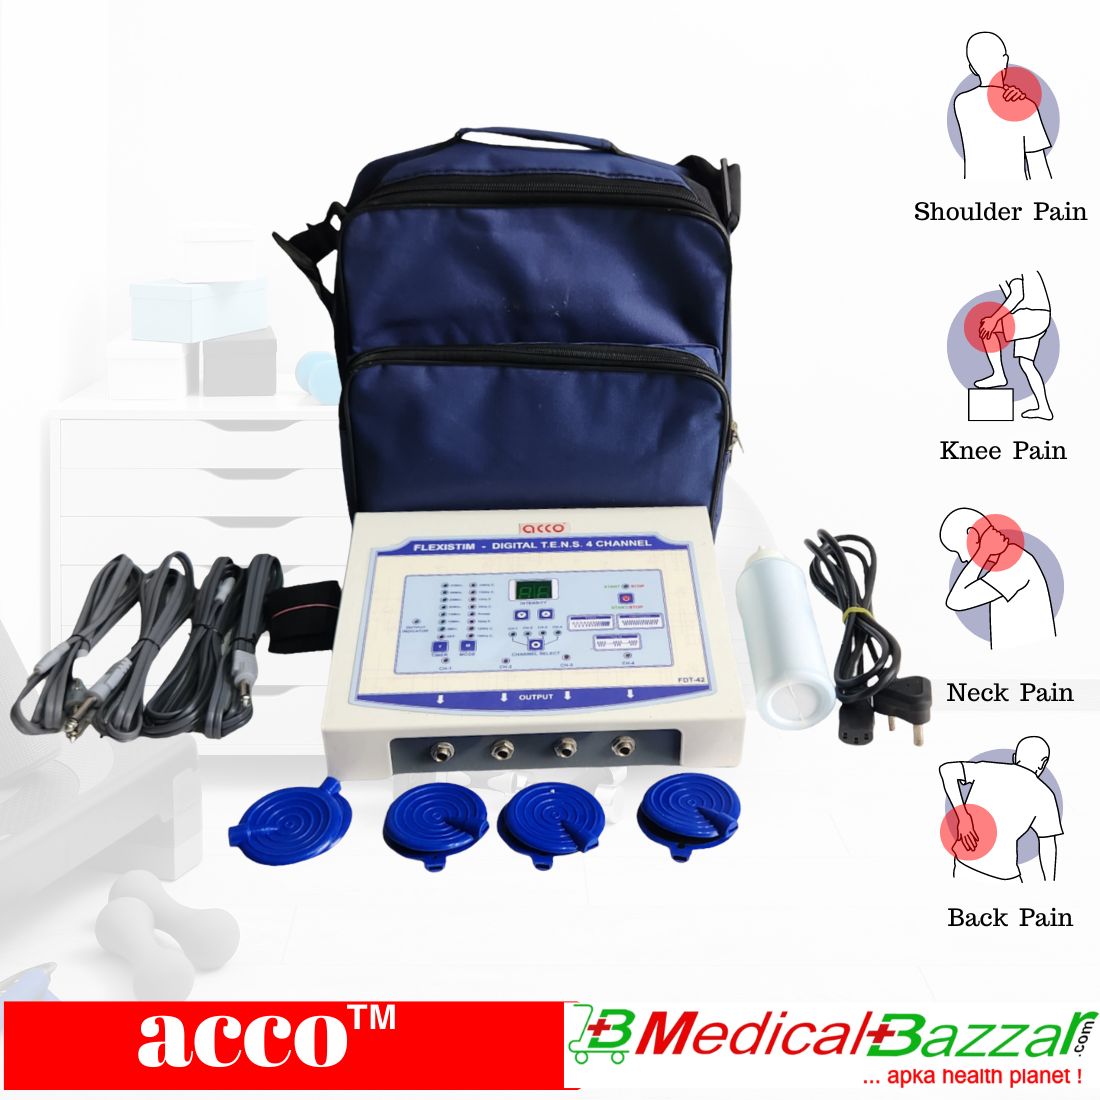 acco Advance Tens Machine 4 ch for physiotherapy